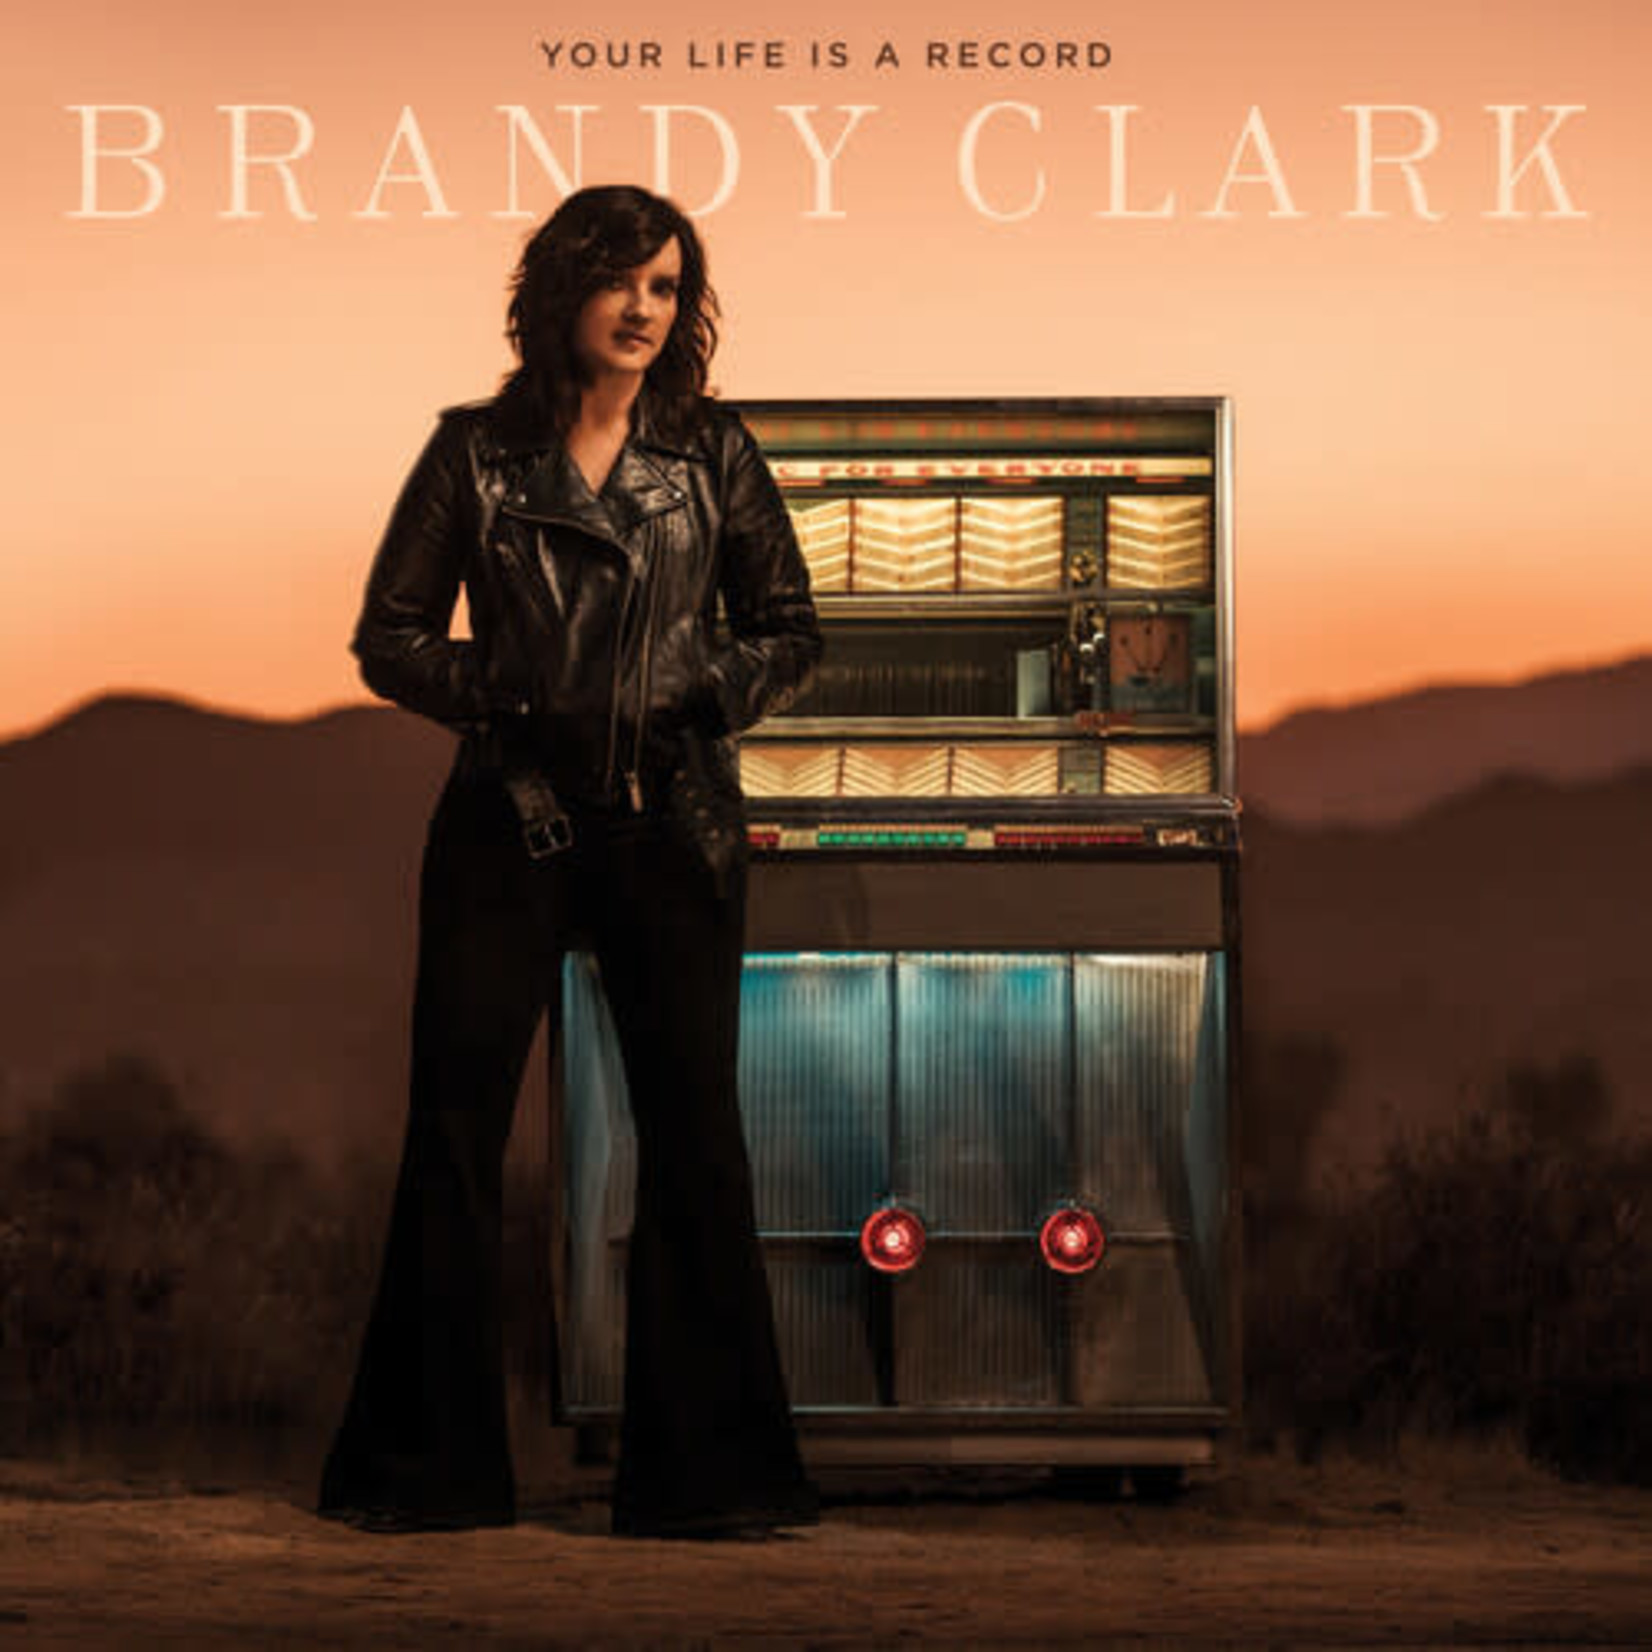 Warner Bros Brandy Clark - Your Life Is A Record (LP)